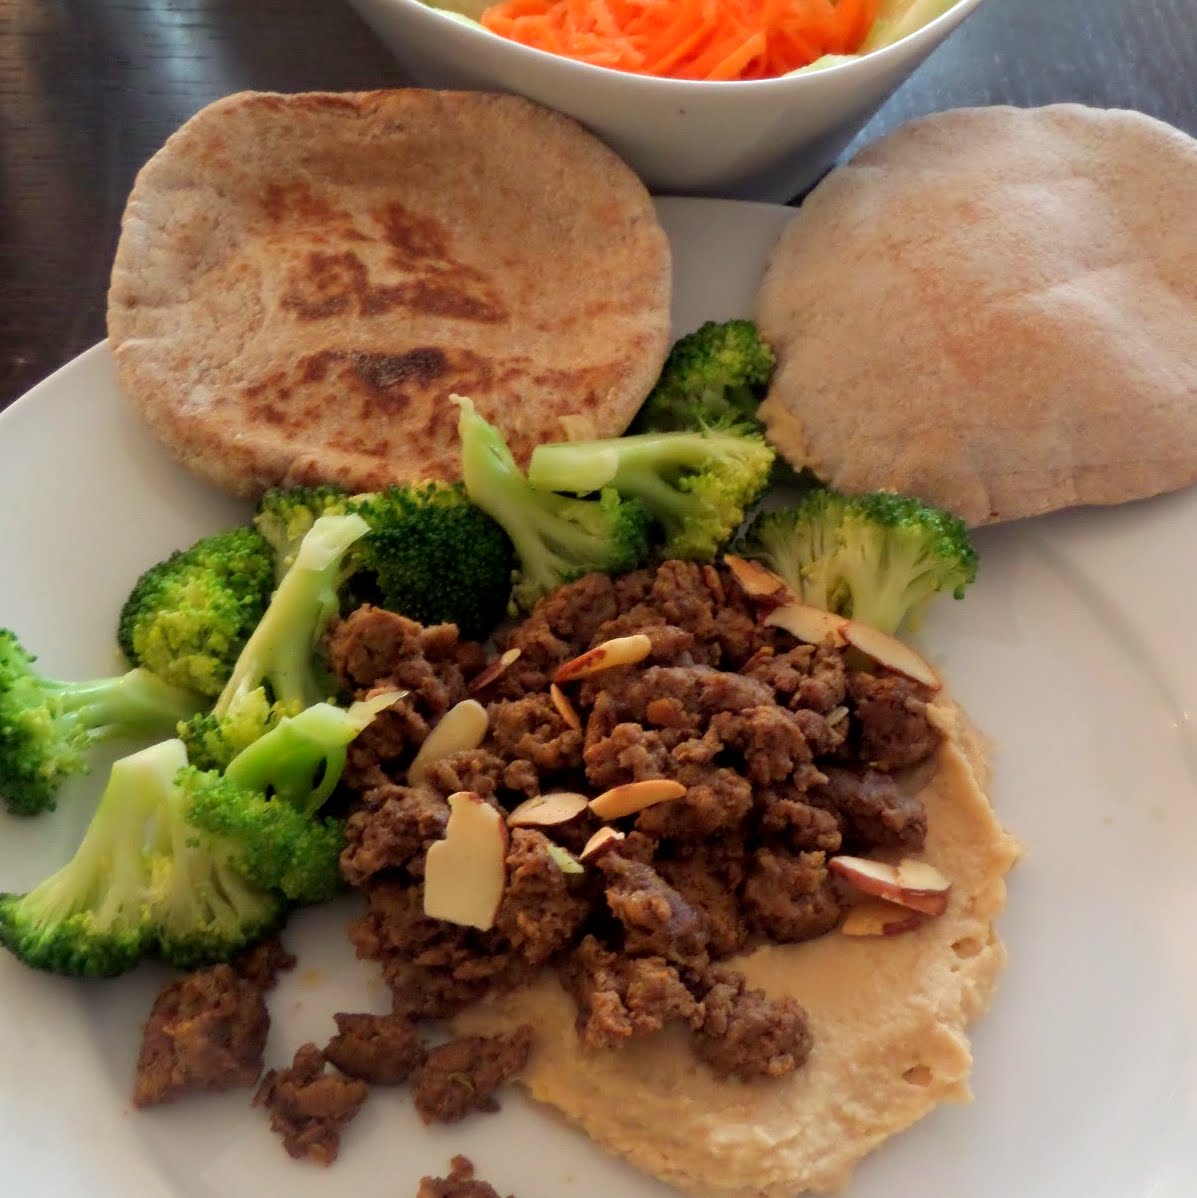 Spiced Lamb and Hummus:  Ground lamb cooked with Mediterranean spices and served atop hummus.